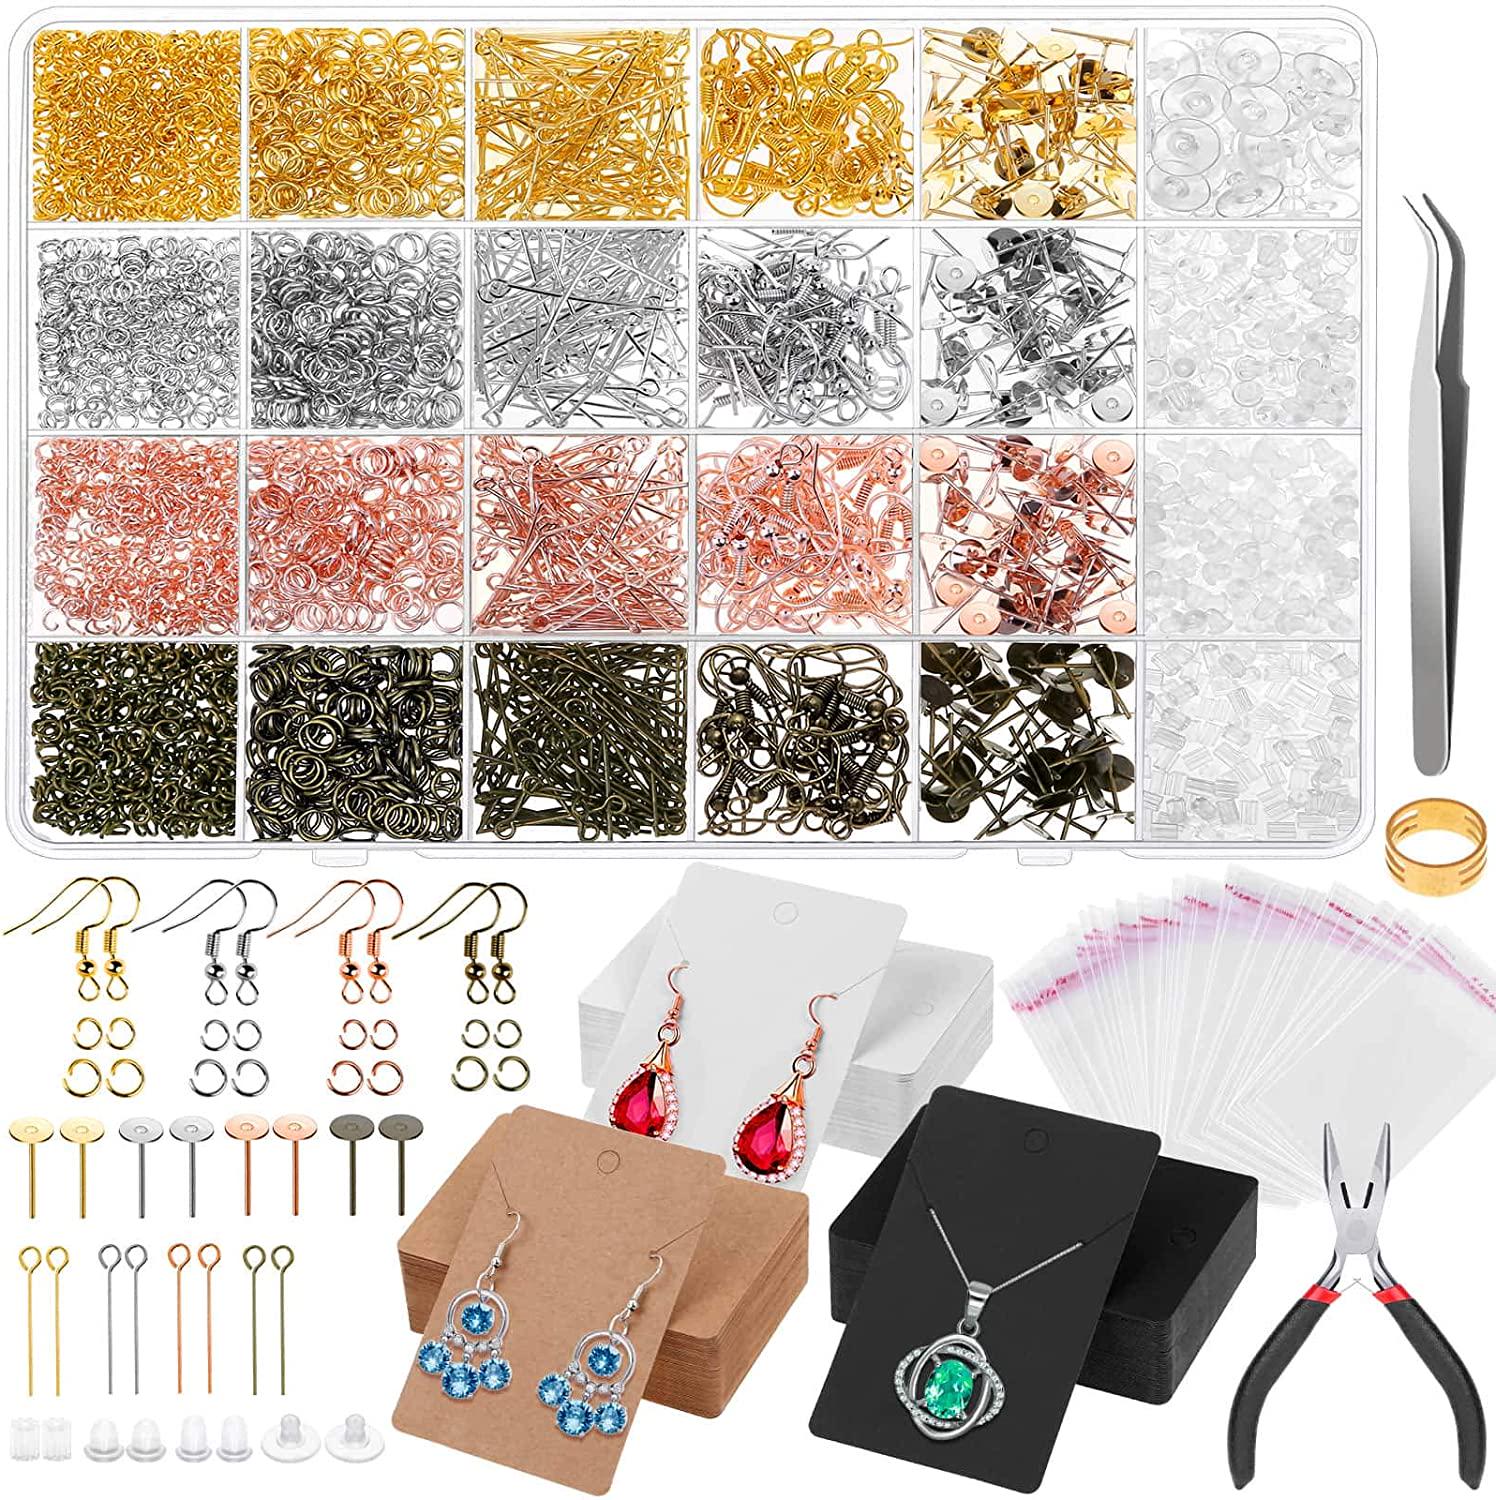 anezus, Earring Making Kit with Earring Cards, Anezus 3663Pcs Earring Making Supplies Kit with Earring Hooks, Earring Holder Cards, Earring Backs and Posts, Jump Rings for DIY Earring Jewelry Making